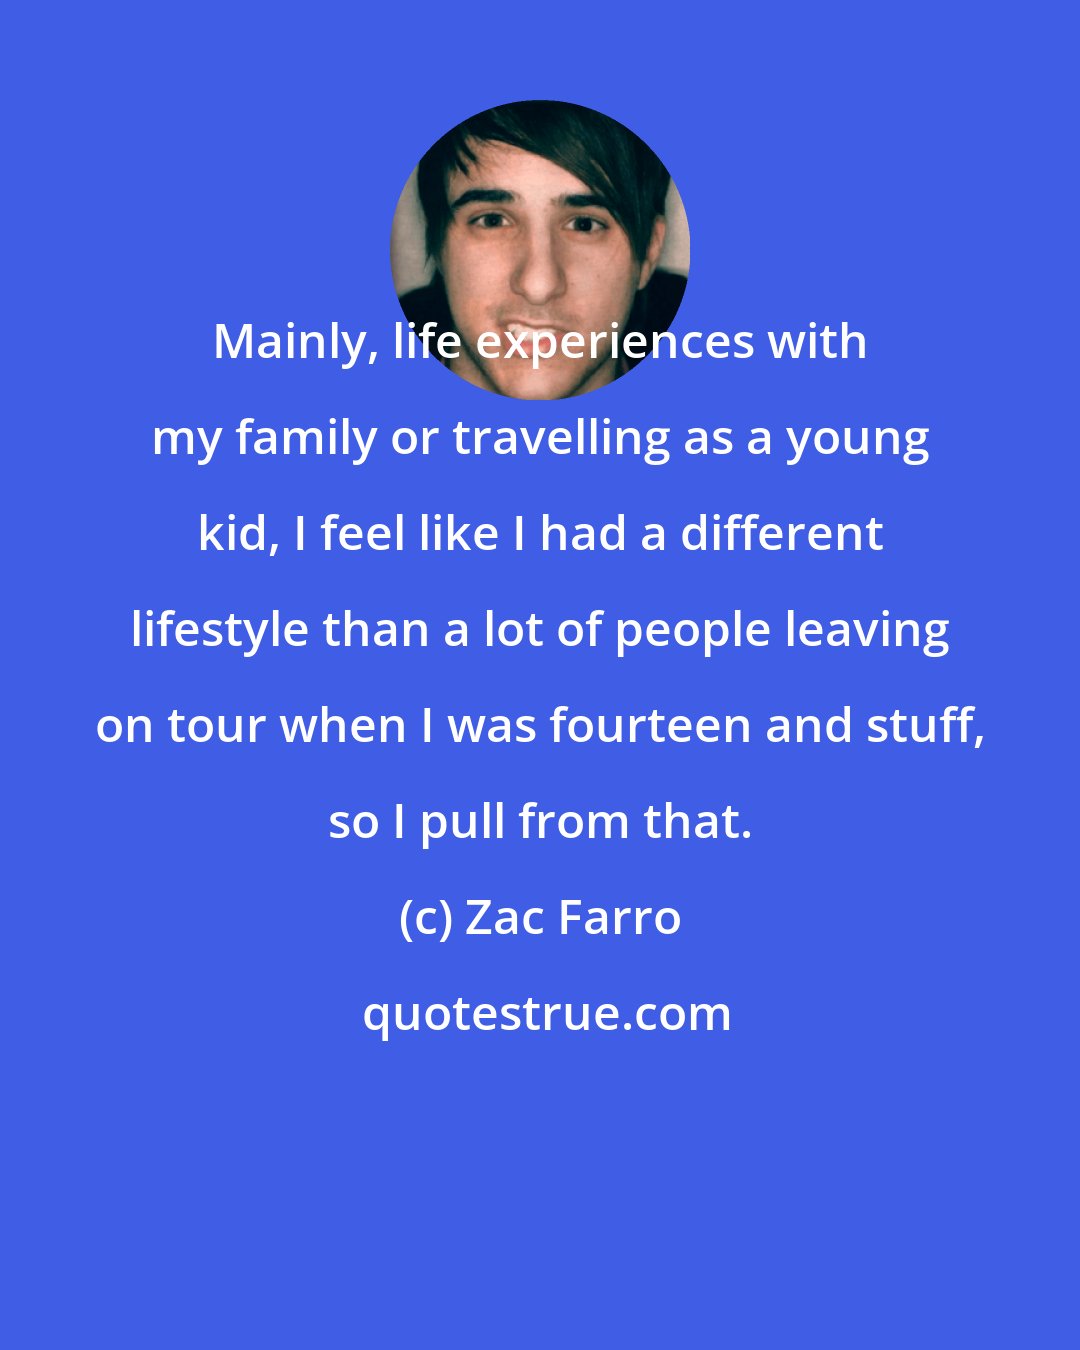 Zac Farro: Mainly, life experiences with my family or travelling as a young kid, I feel like I had a different lifestyle than a lot of people leaving on tour when I was fourteen and stuff, so I pull from that.